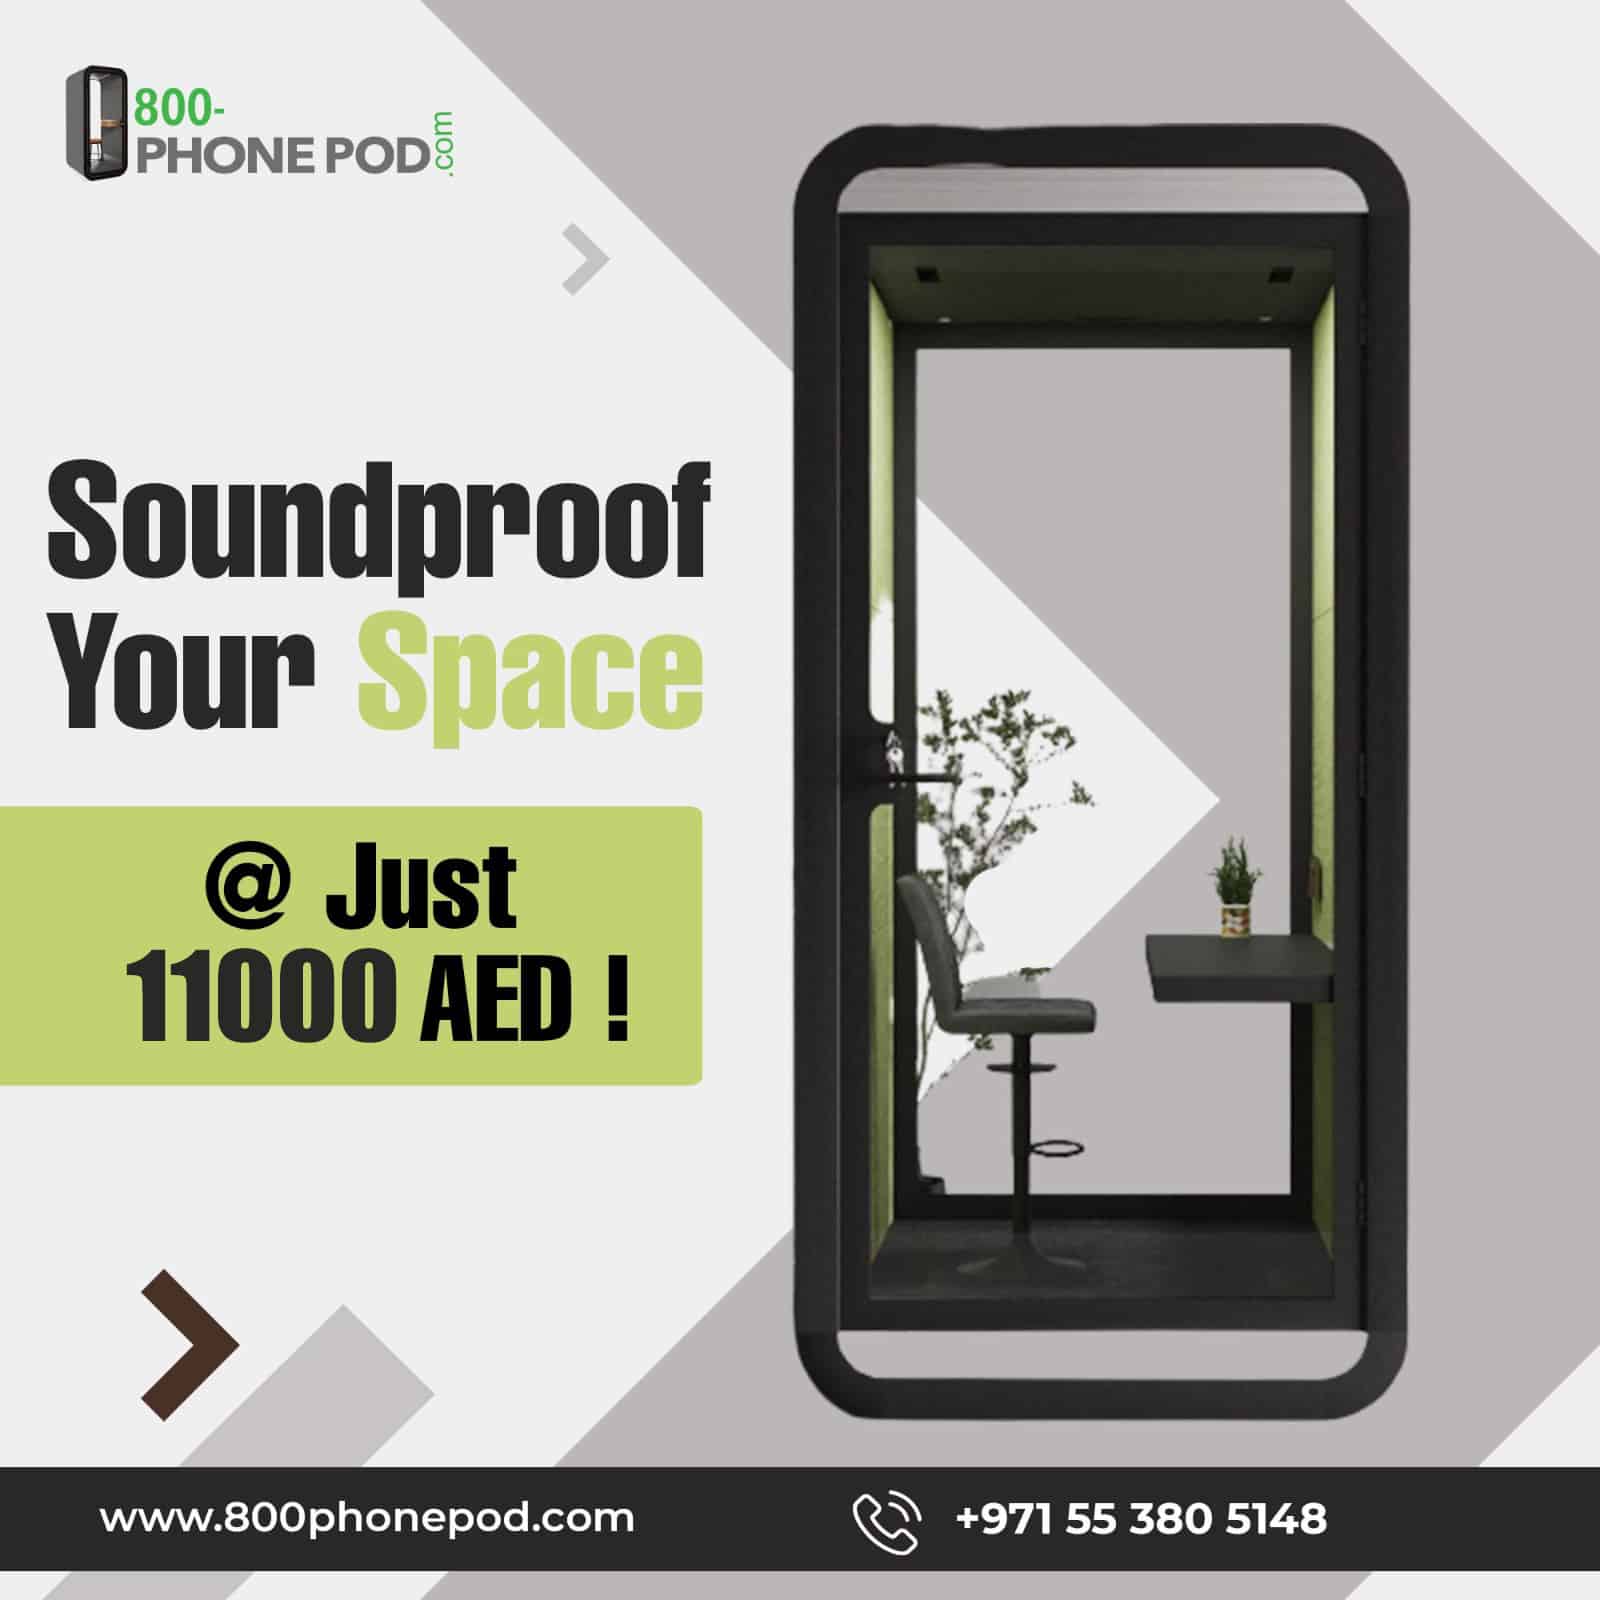 800Phonepod-Offer-11000AED